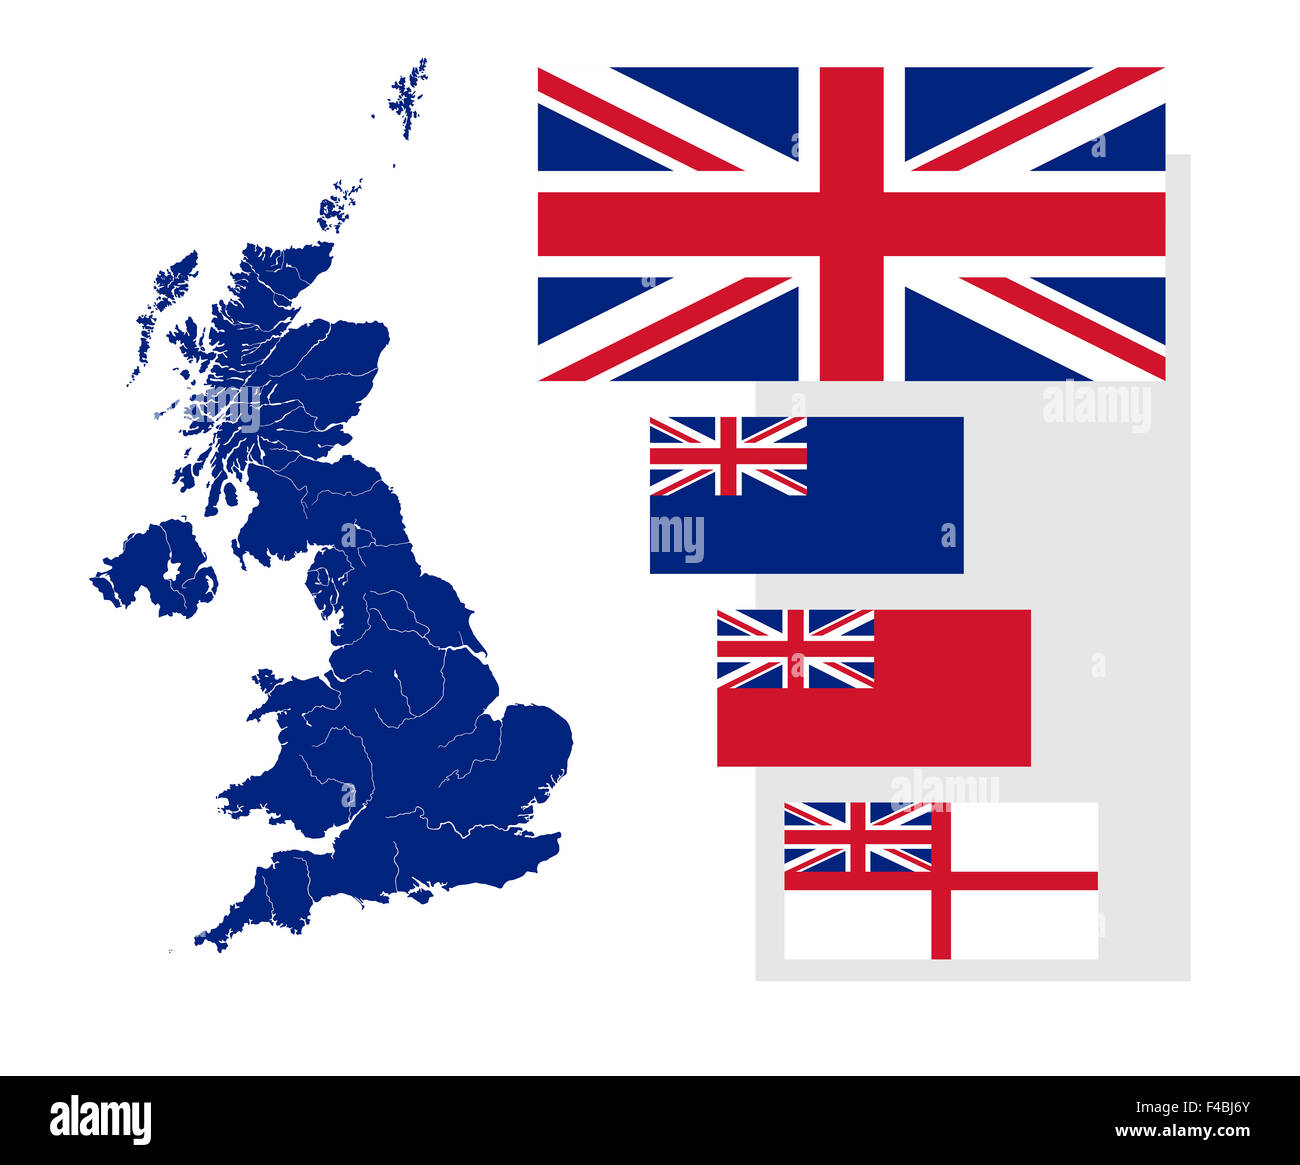 Map of the United Kingdom with rivers and four British flags - national flag, state ensign, civil ensign and naval ensign. Stock Photo